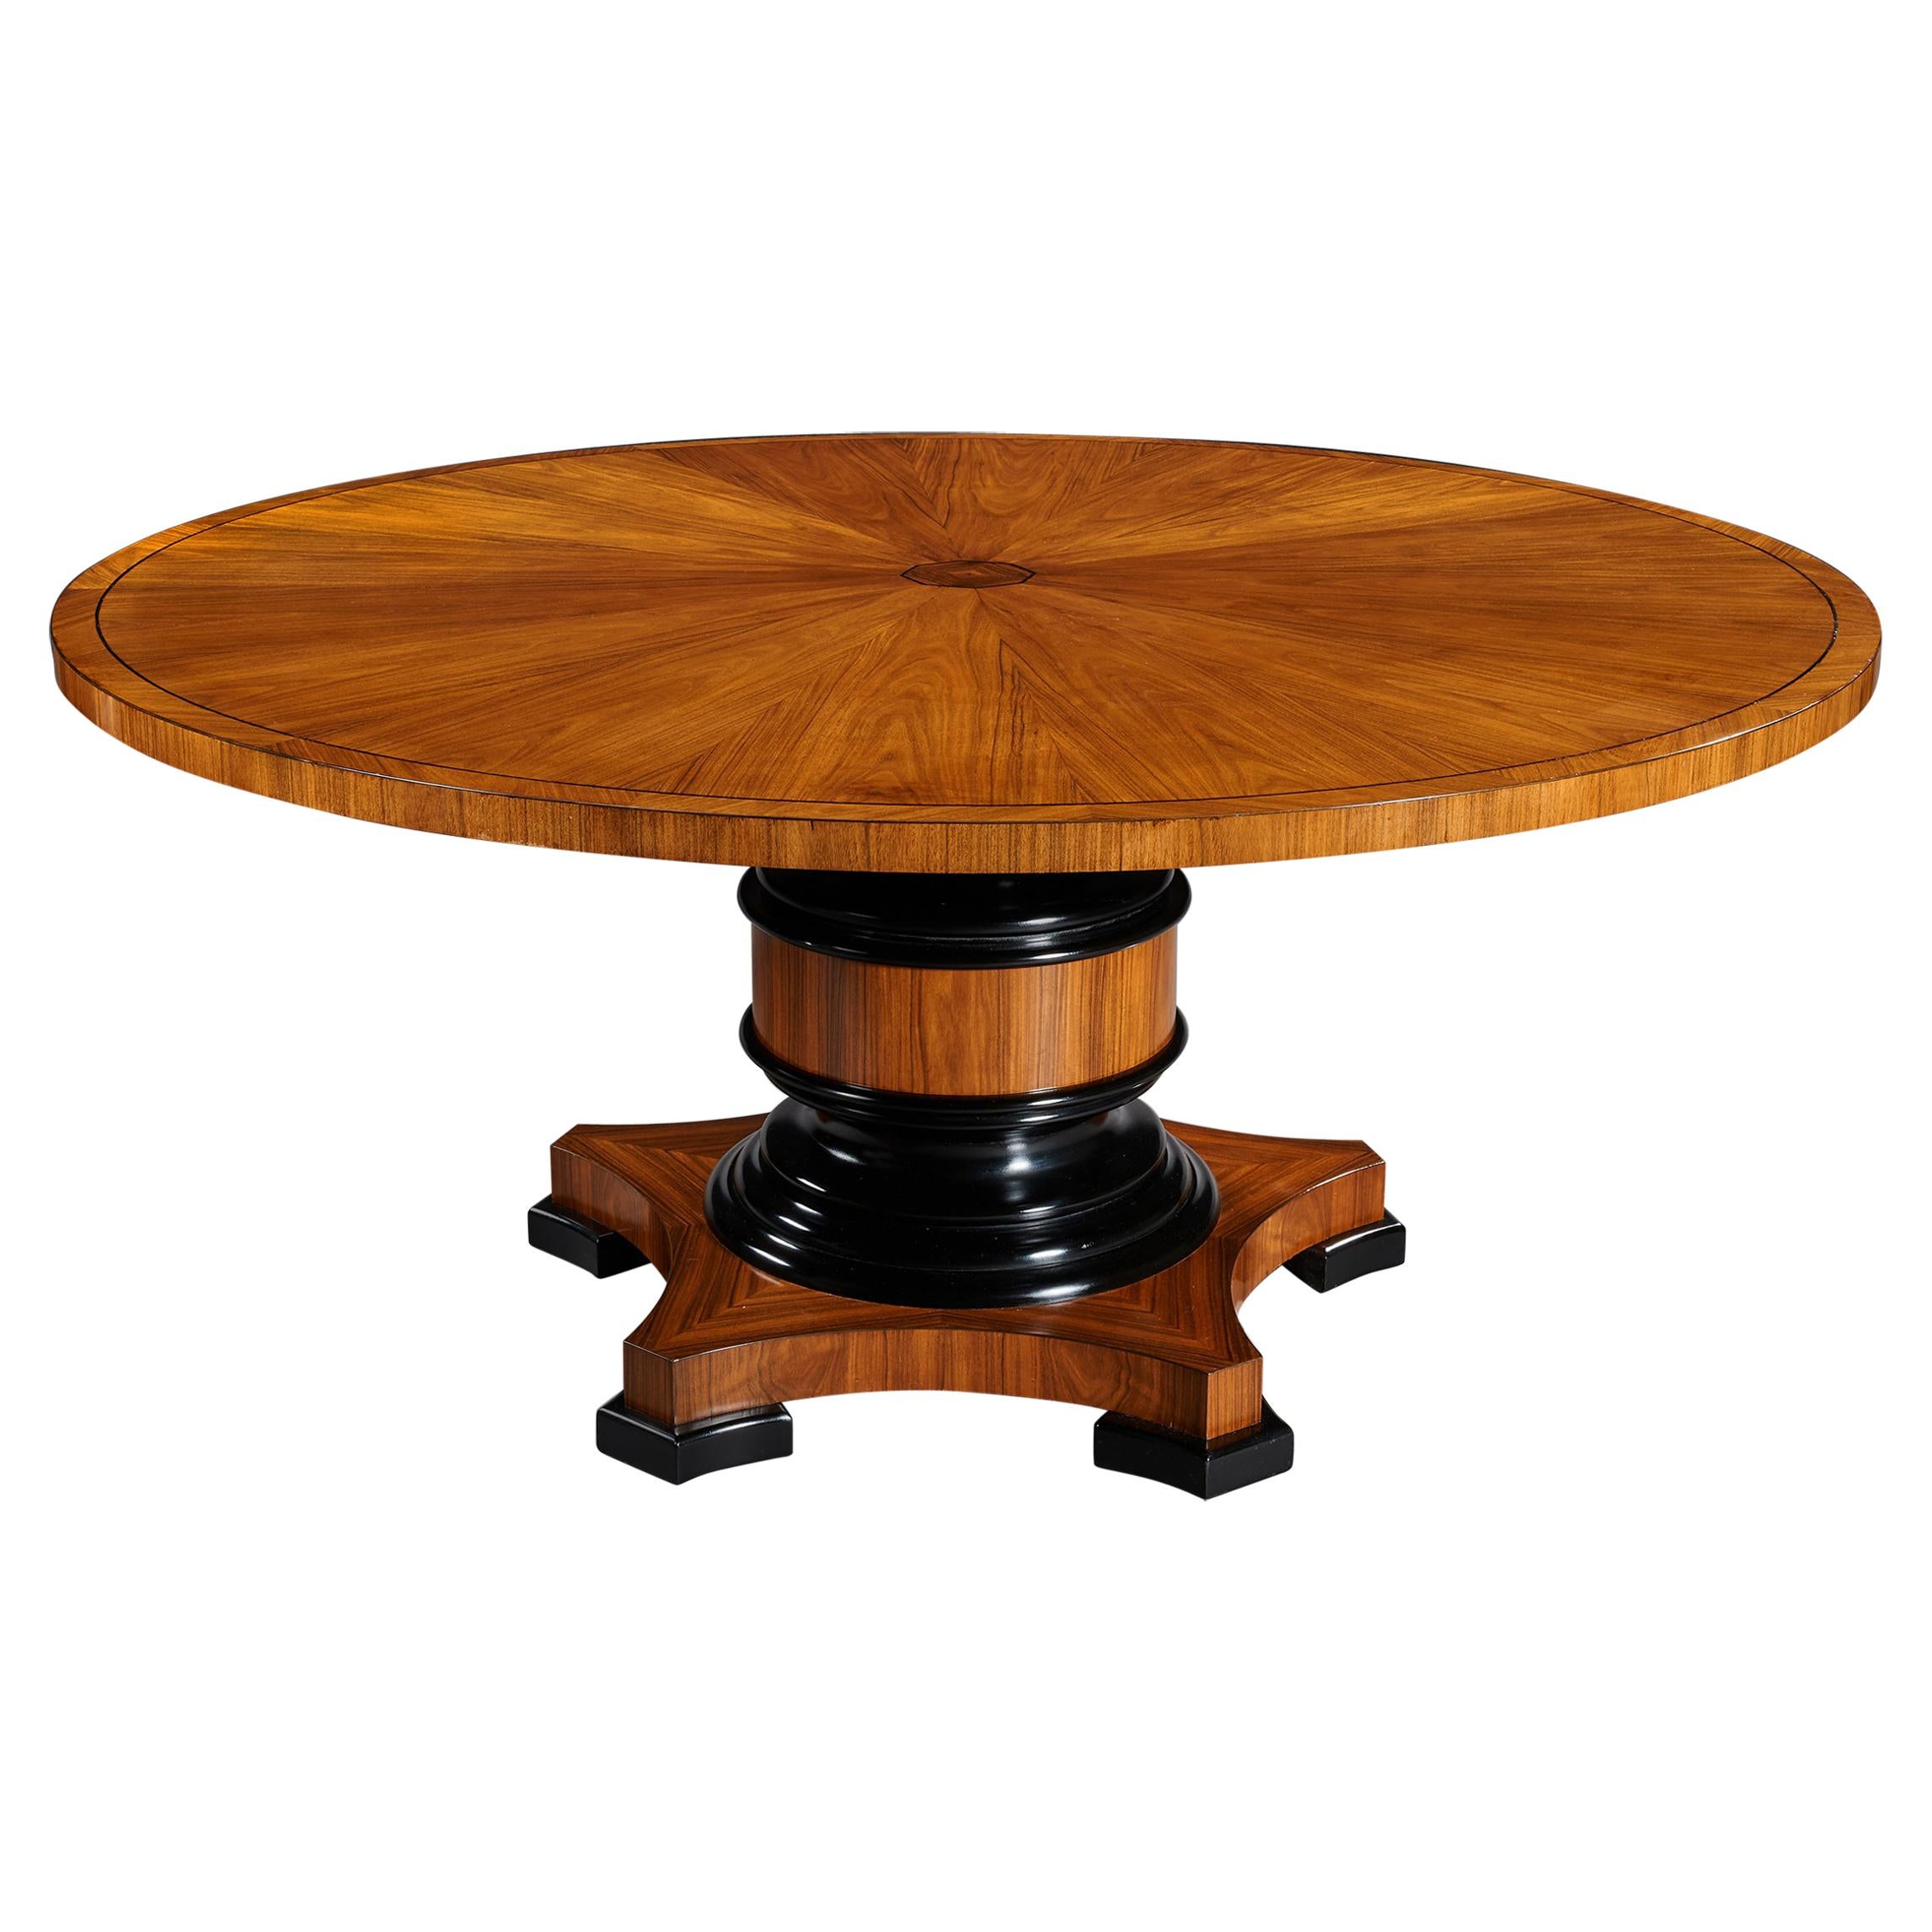 Circular Olive Wood and Ebony Dining Table